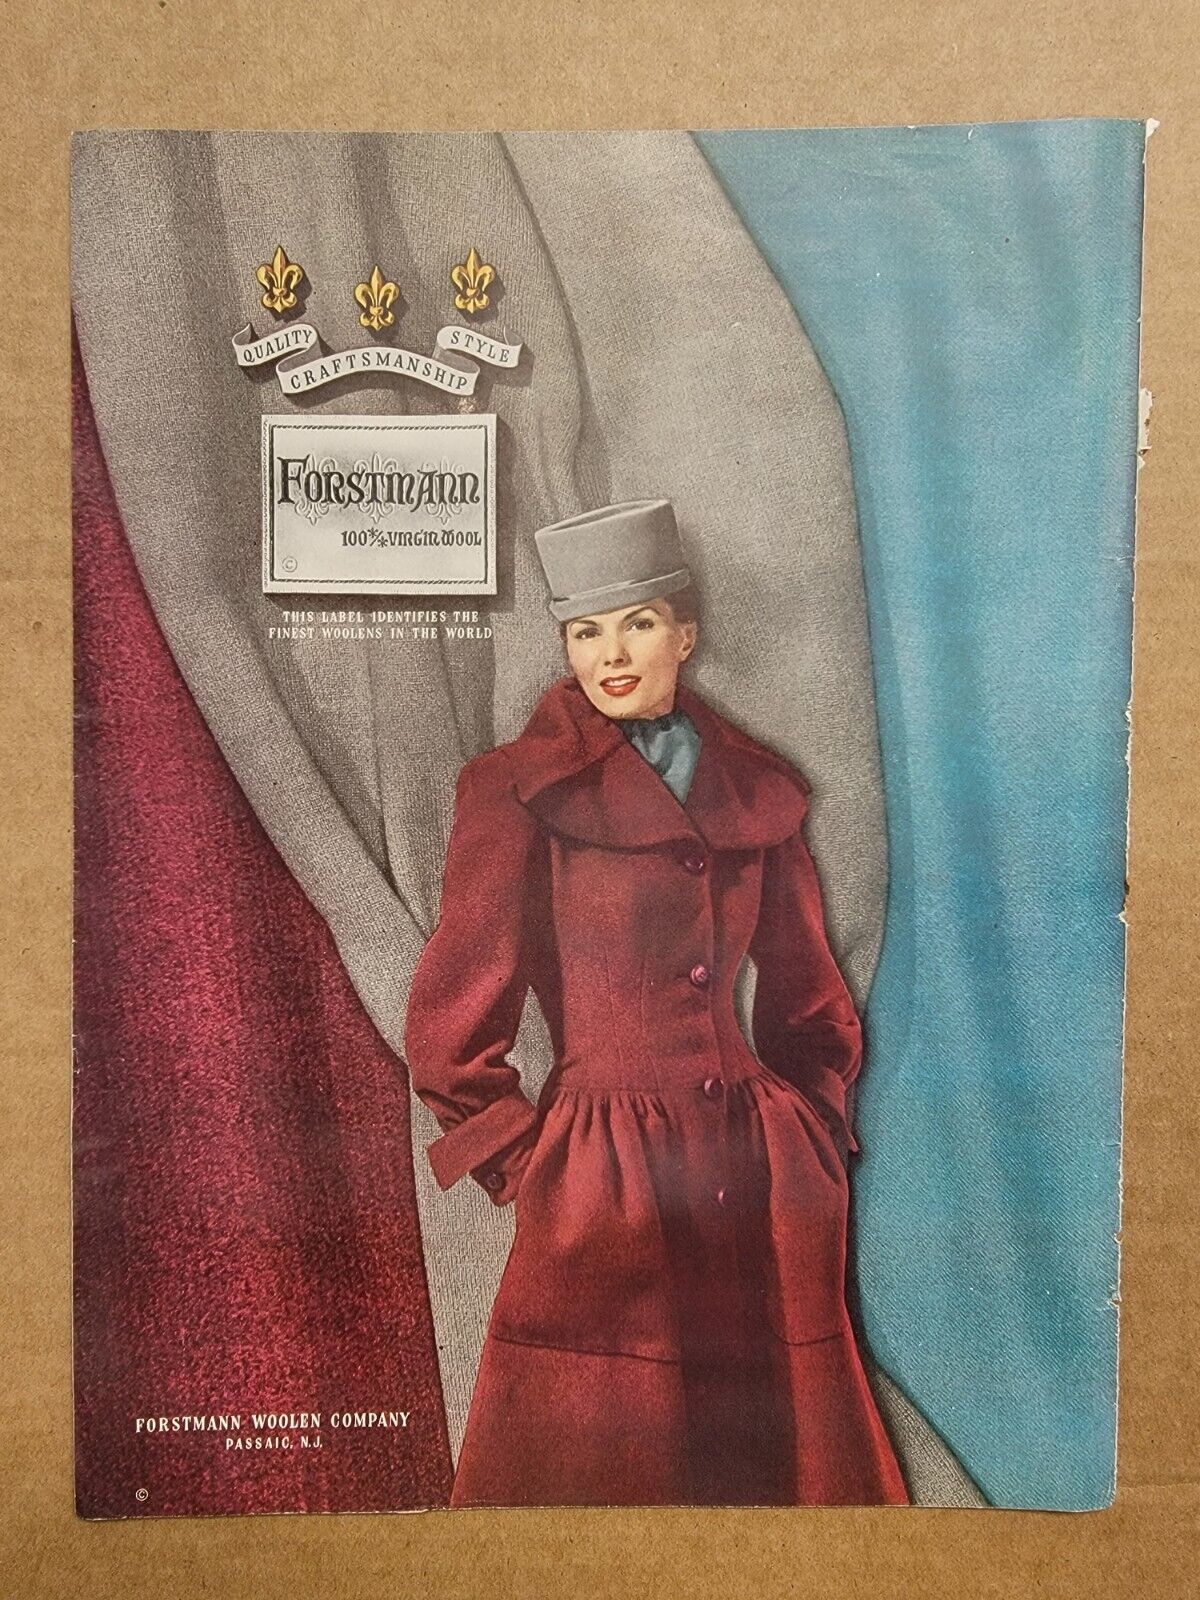 NOSTALGIC Print Ad Advertisement 1946 Forstmann Woolen Company Outfit with Hat